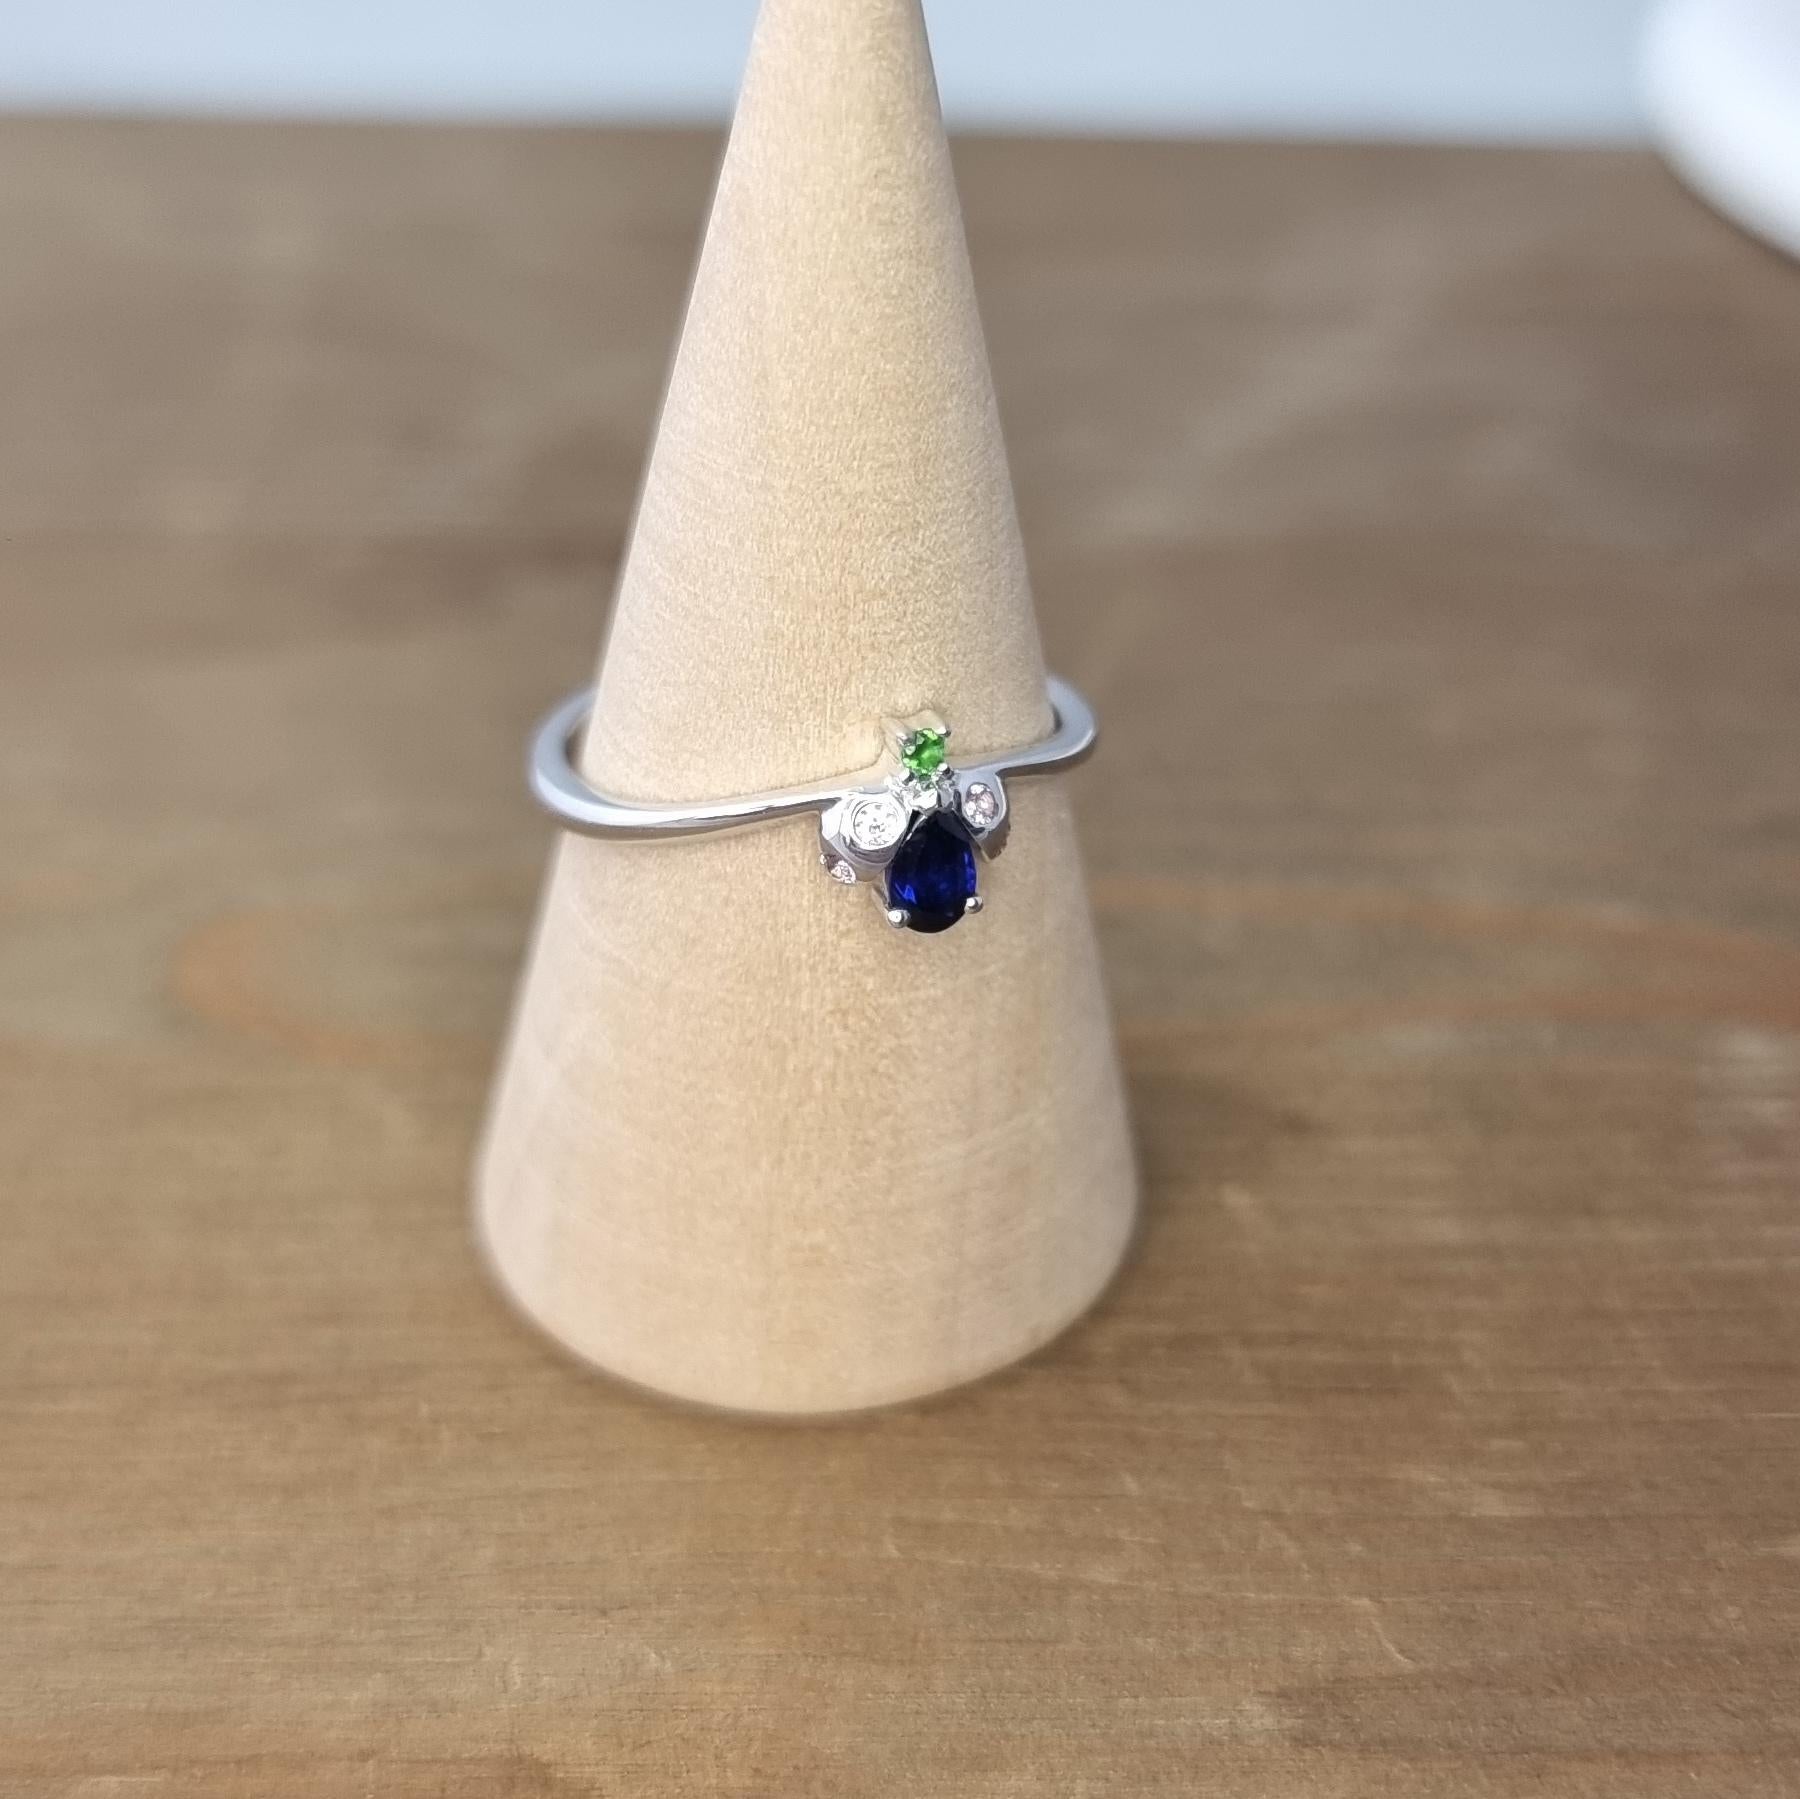 White Gold Lady Bug Ring with Sapphires and Tsavorite For Sale 2